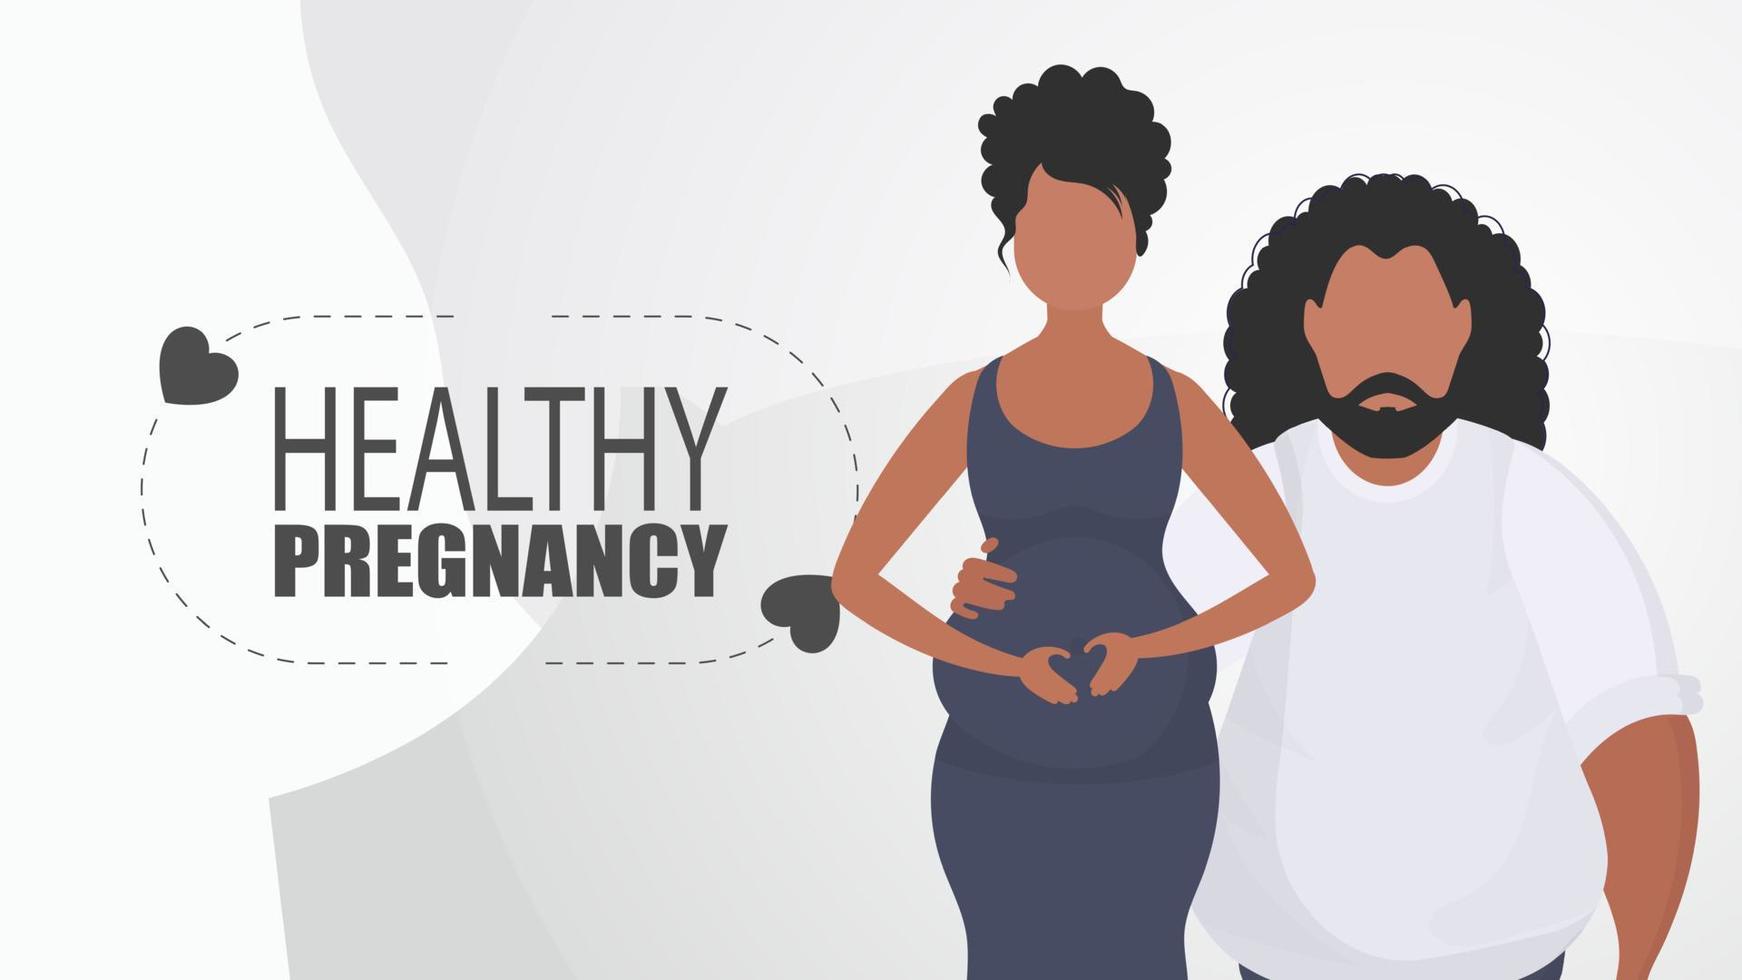 Healthy pregnancy. A man hugs a pregnant woman. A young family is expecting a baby. Positive and conscious pregnancy. Analysis illustration in flat style. vector